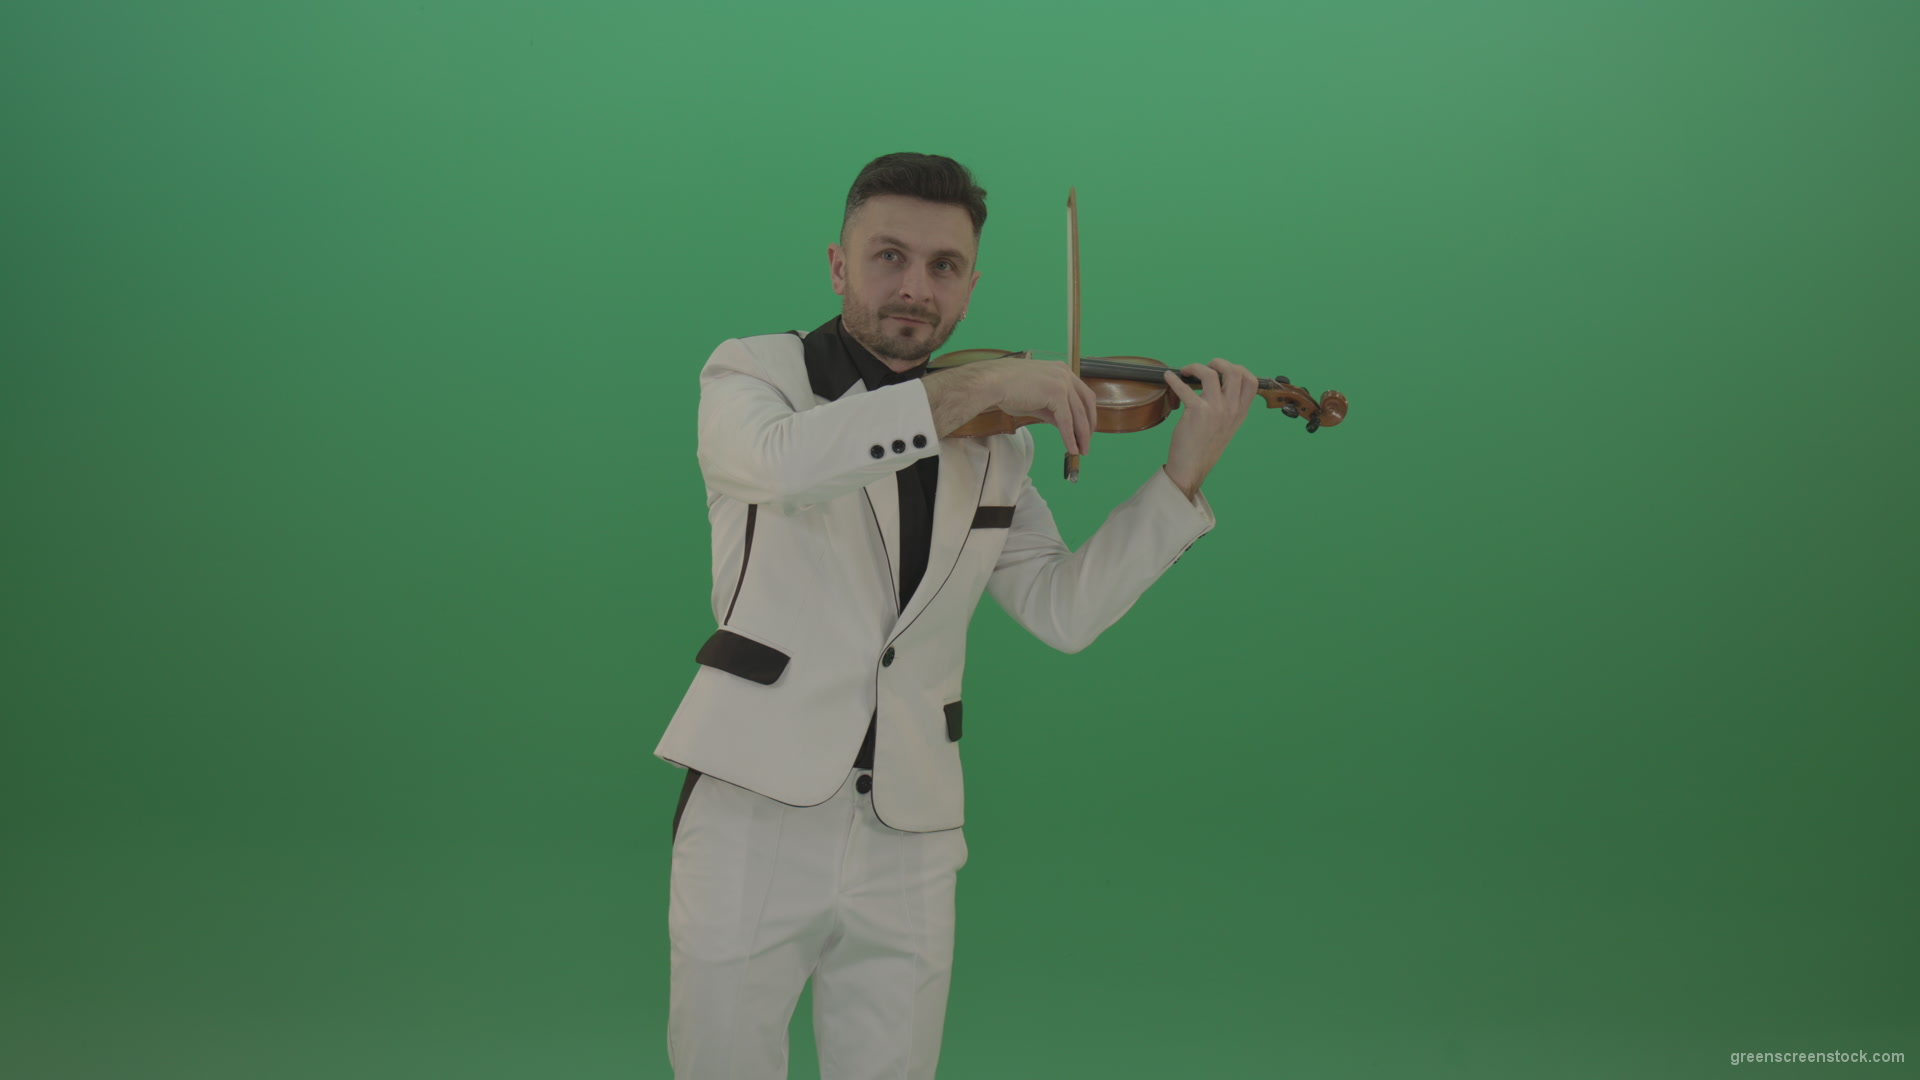 Happy-man-in-white-costume-dramatic-playing-violin-music-instrument-isolated-on-green-screen_001 Green Screen Stock